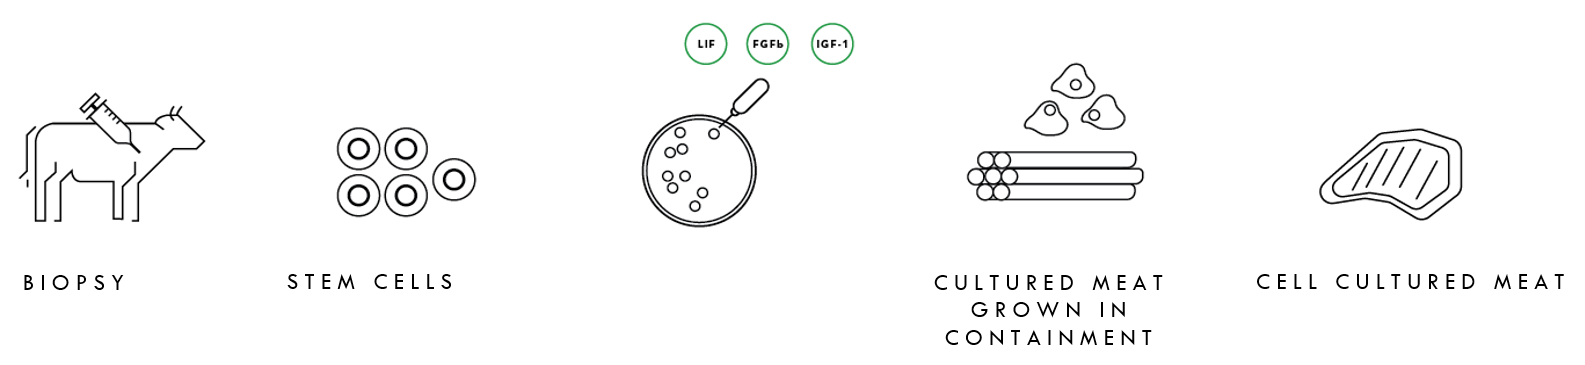 How cell cultured meat is grown